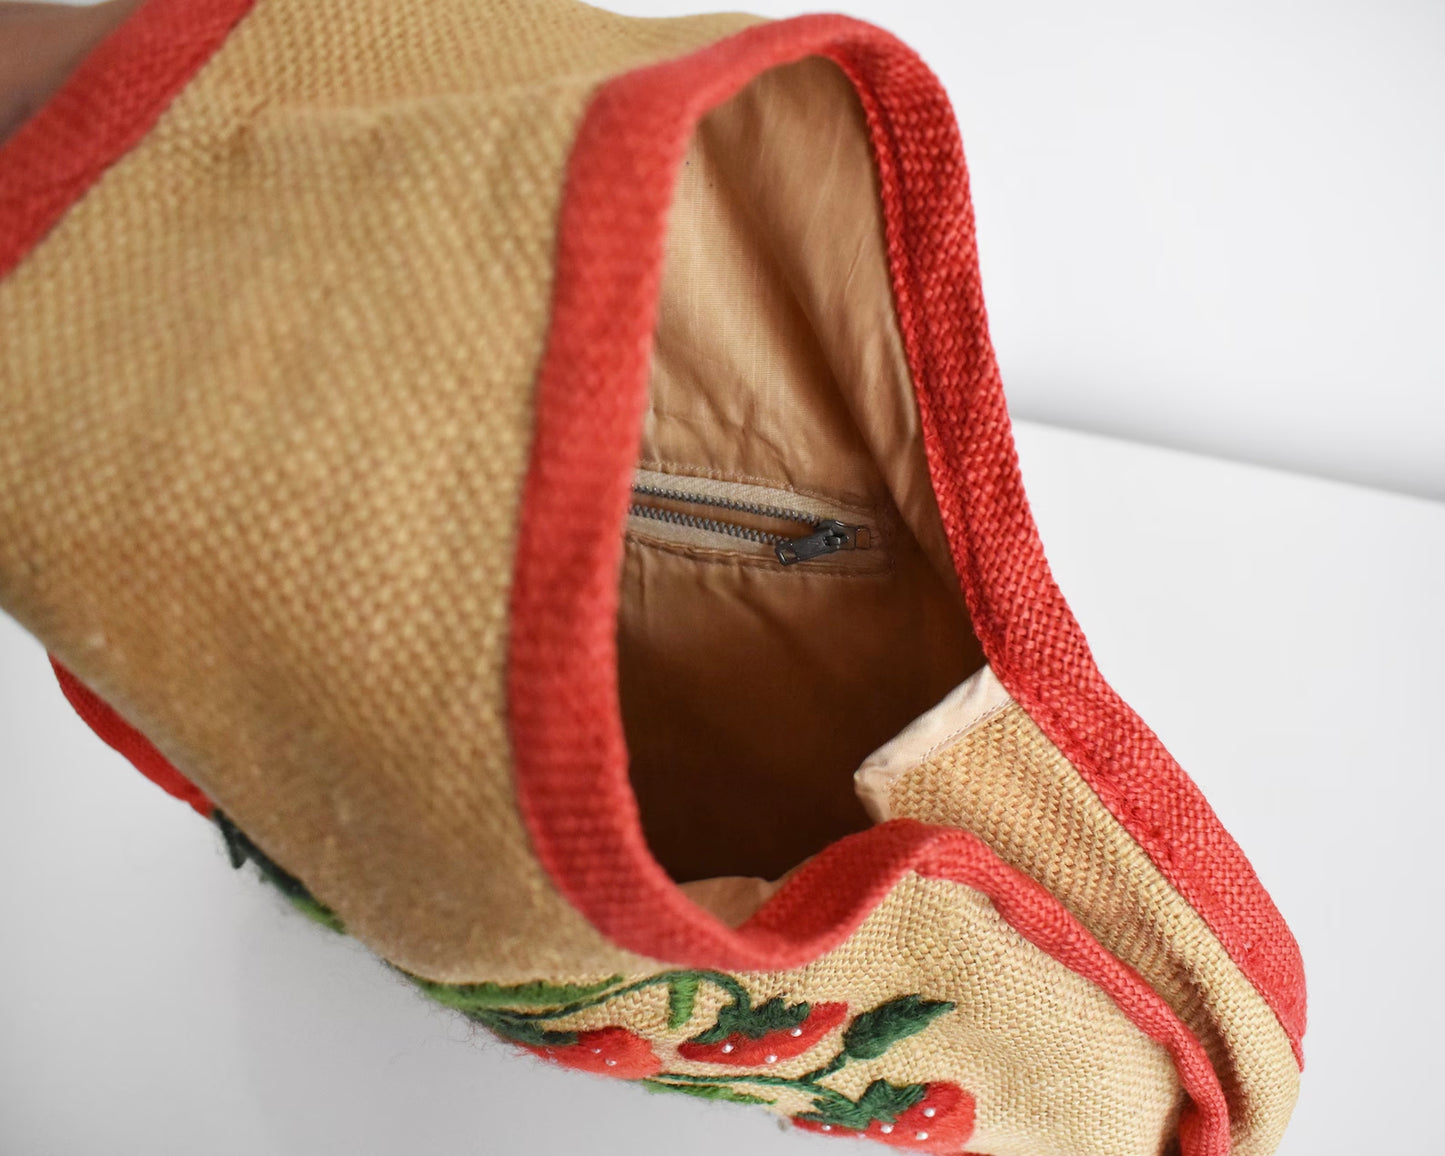 Close up of the inside of the purse that shows the tan lining and zipper pocket